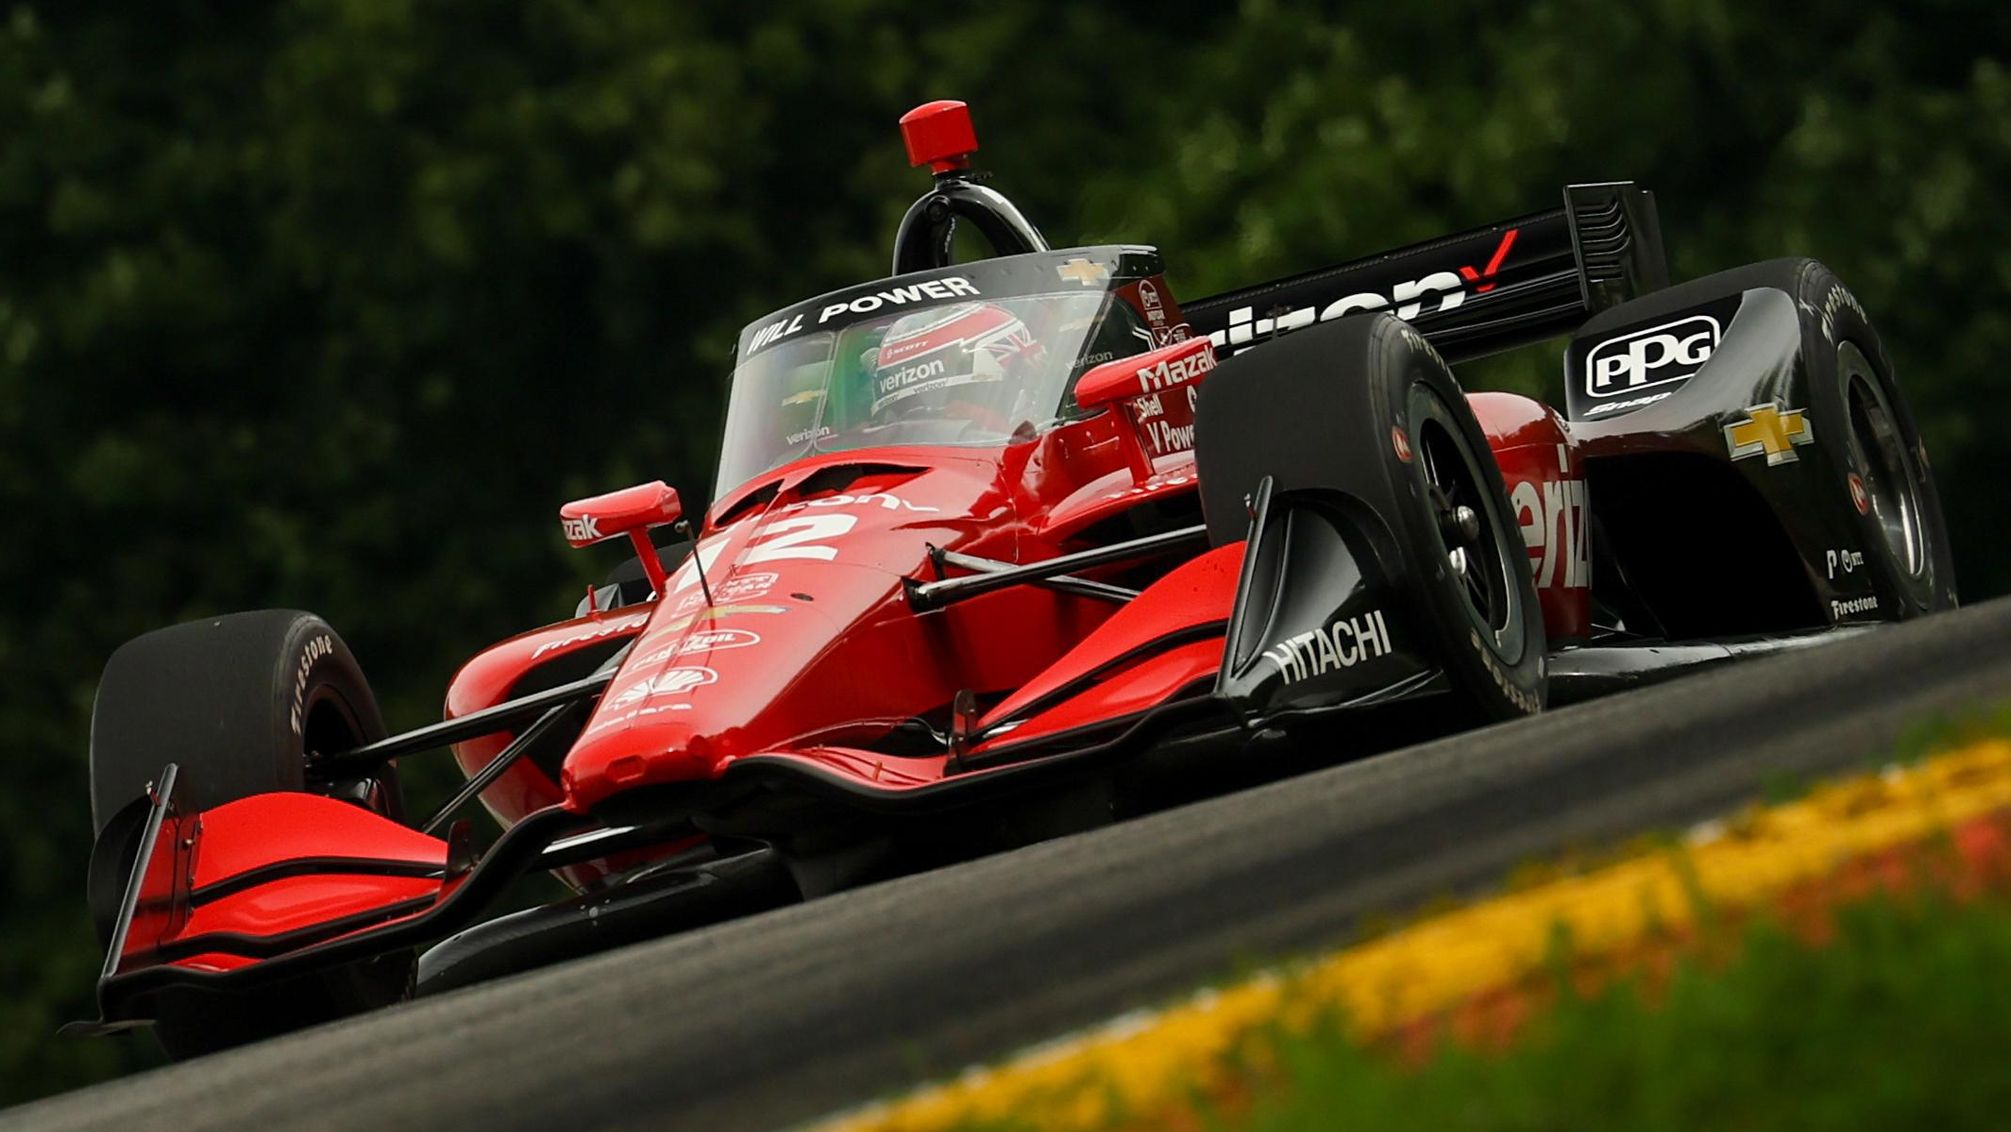 Will Power crests a brow at Mid-Ohio.